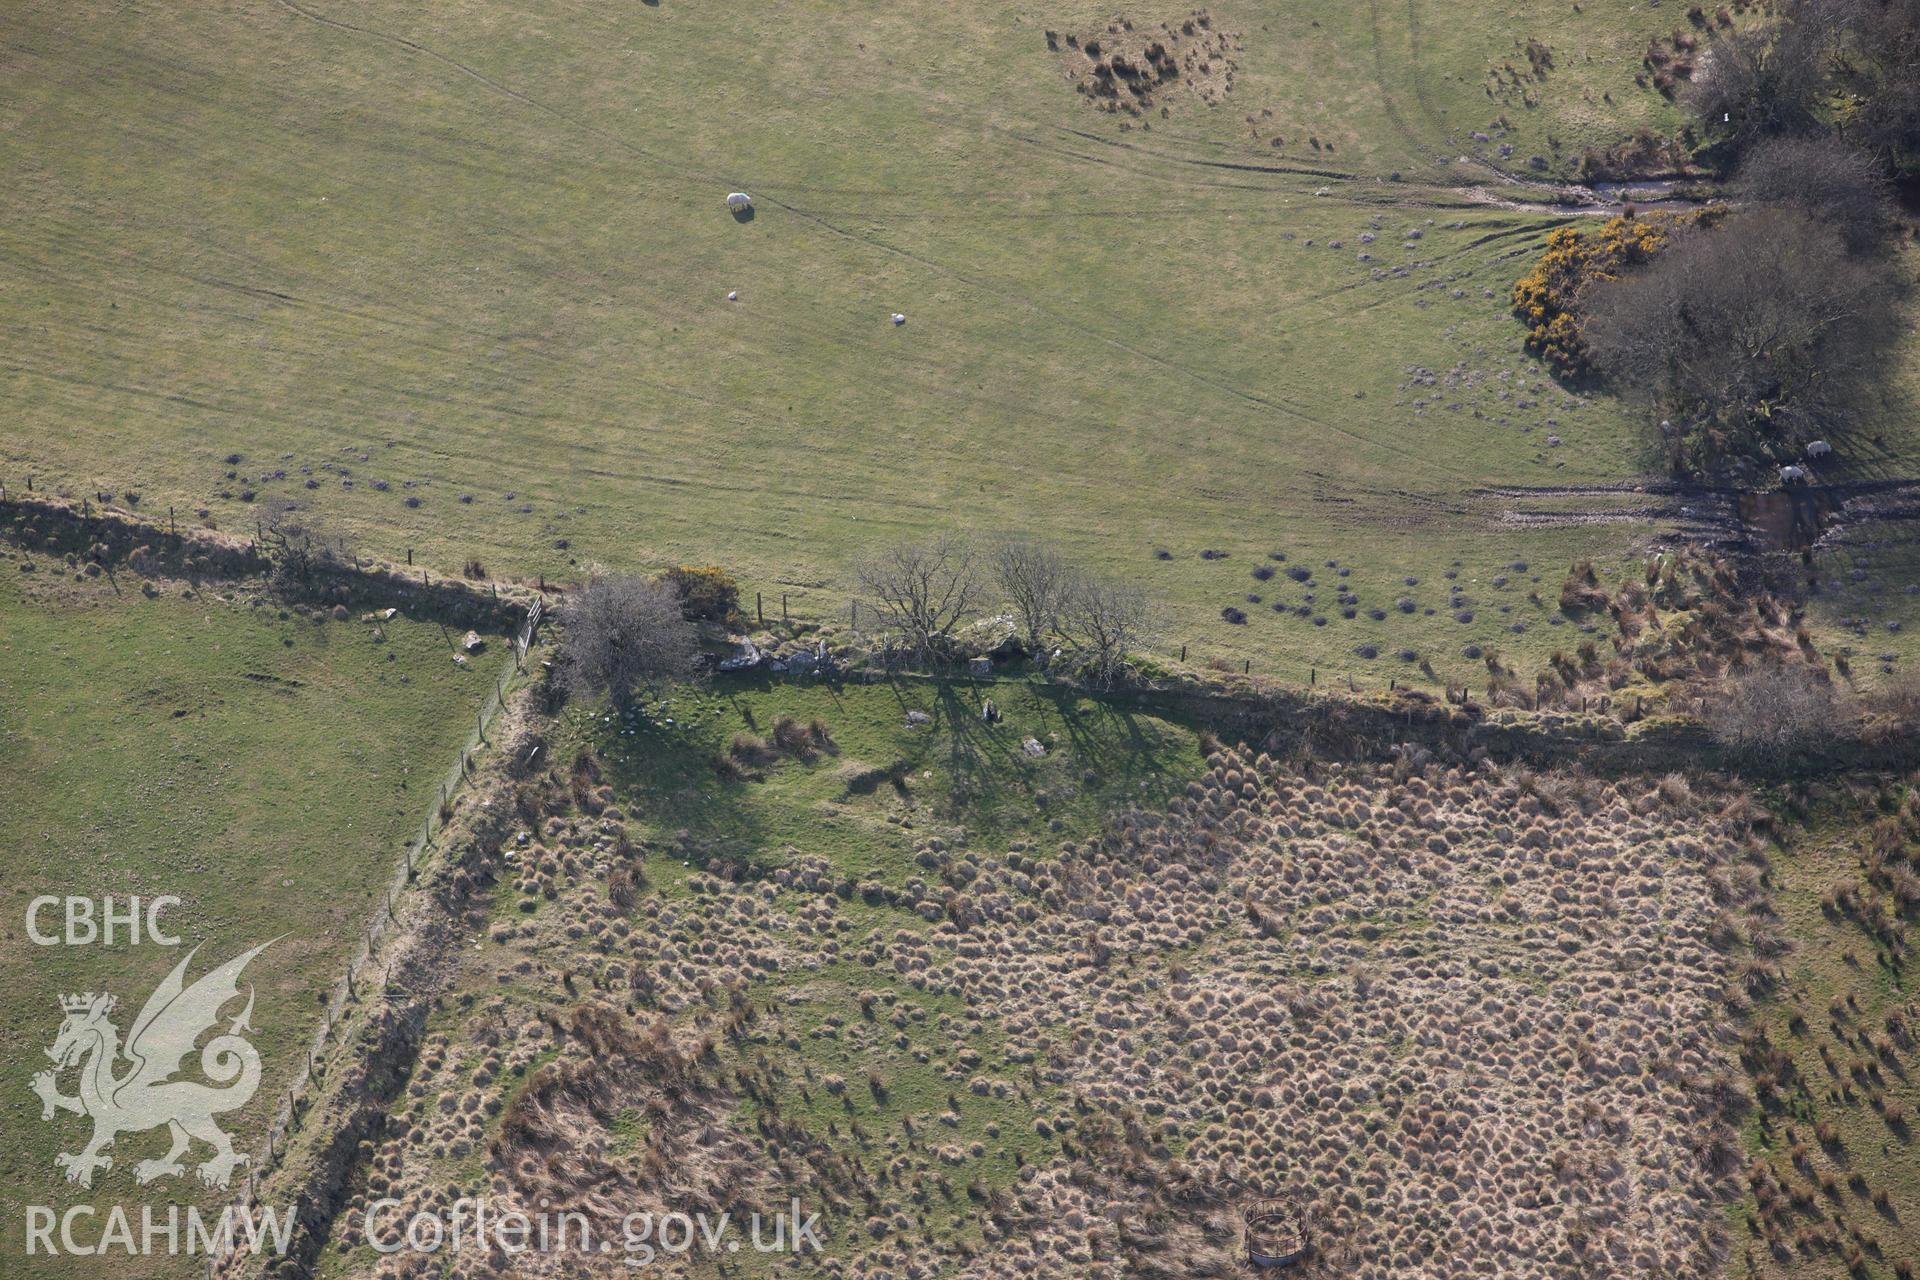 RCAHMW colour oblique aerial photograph of Cerrig Llwydion Chambered Tomb. Taken on 13 April 2010 by Toby Driver